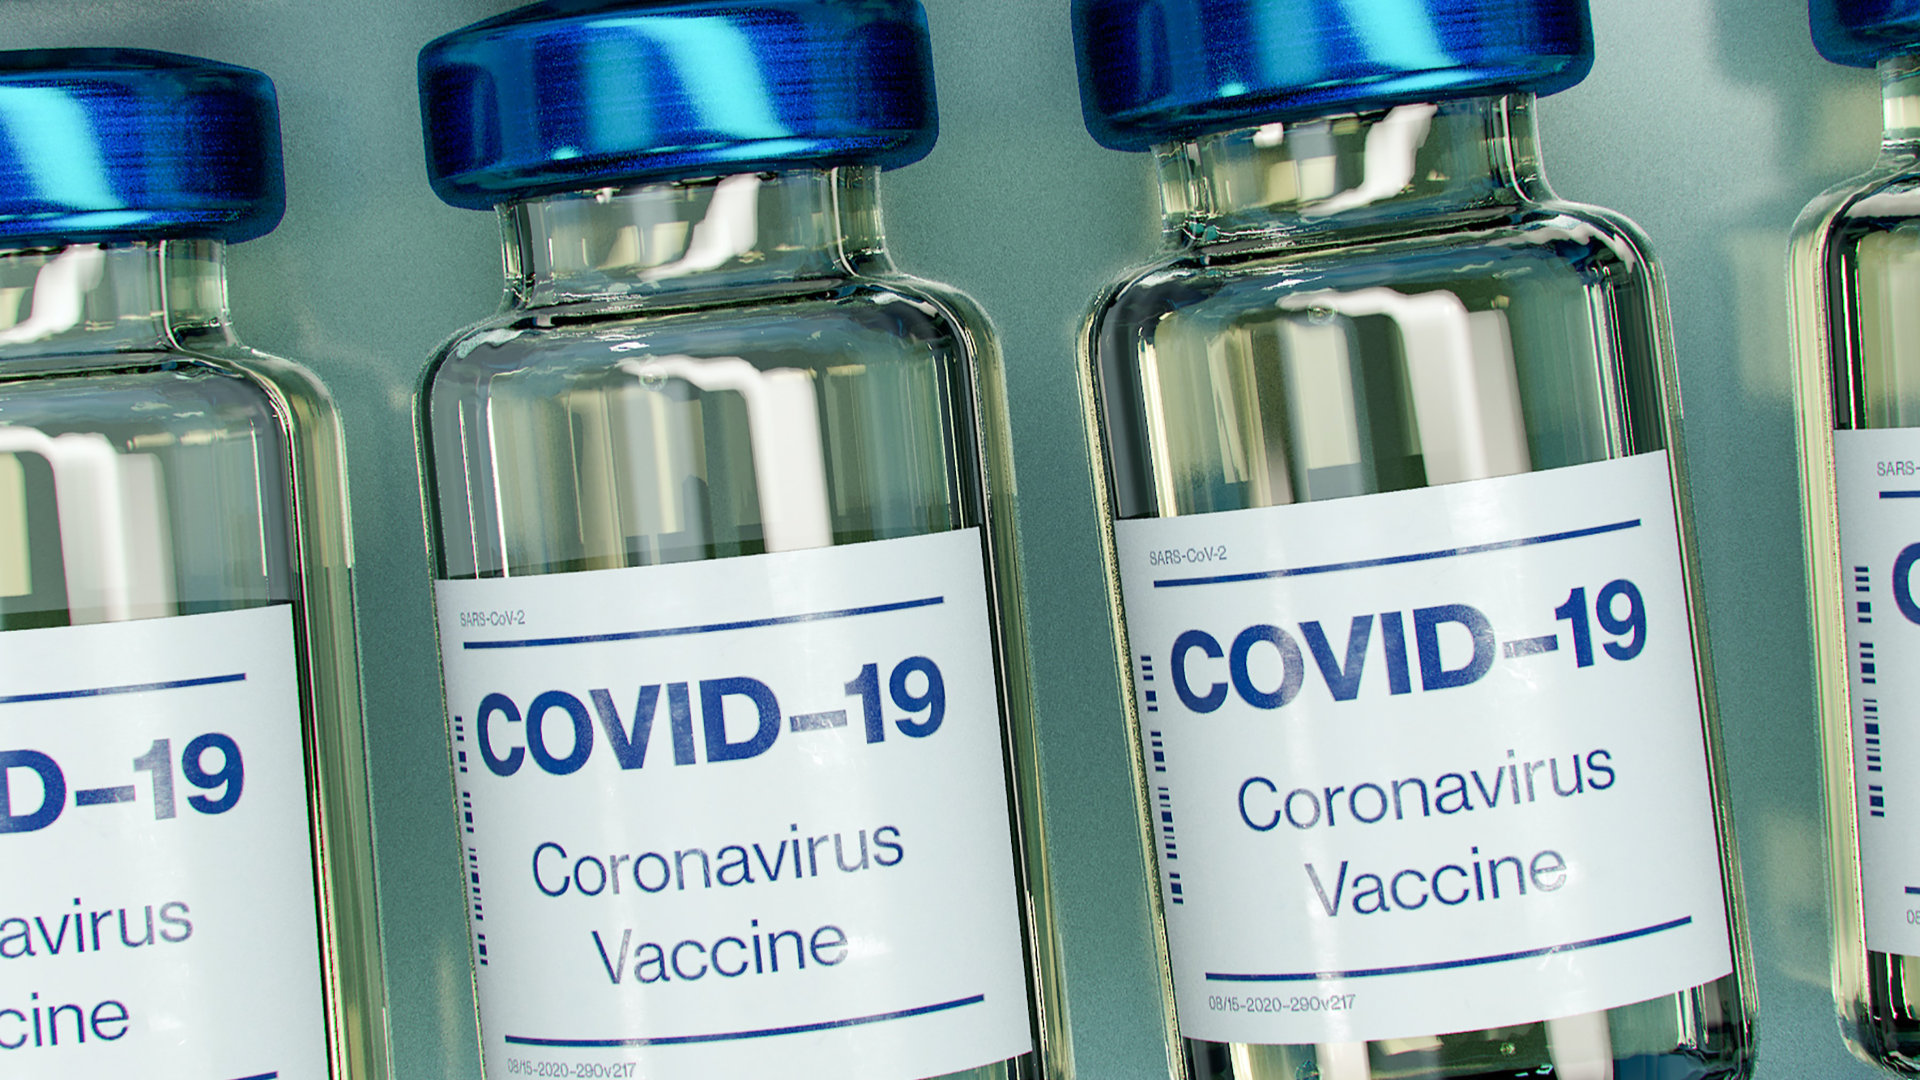 COVID vaccination and EHR projects rely on high-performance transactional email technology and data protection